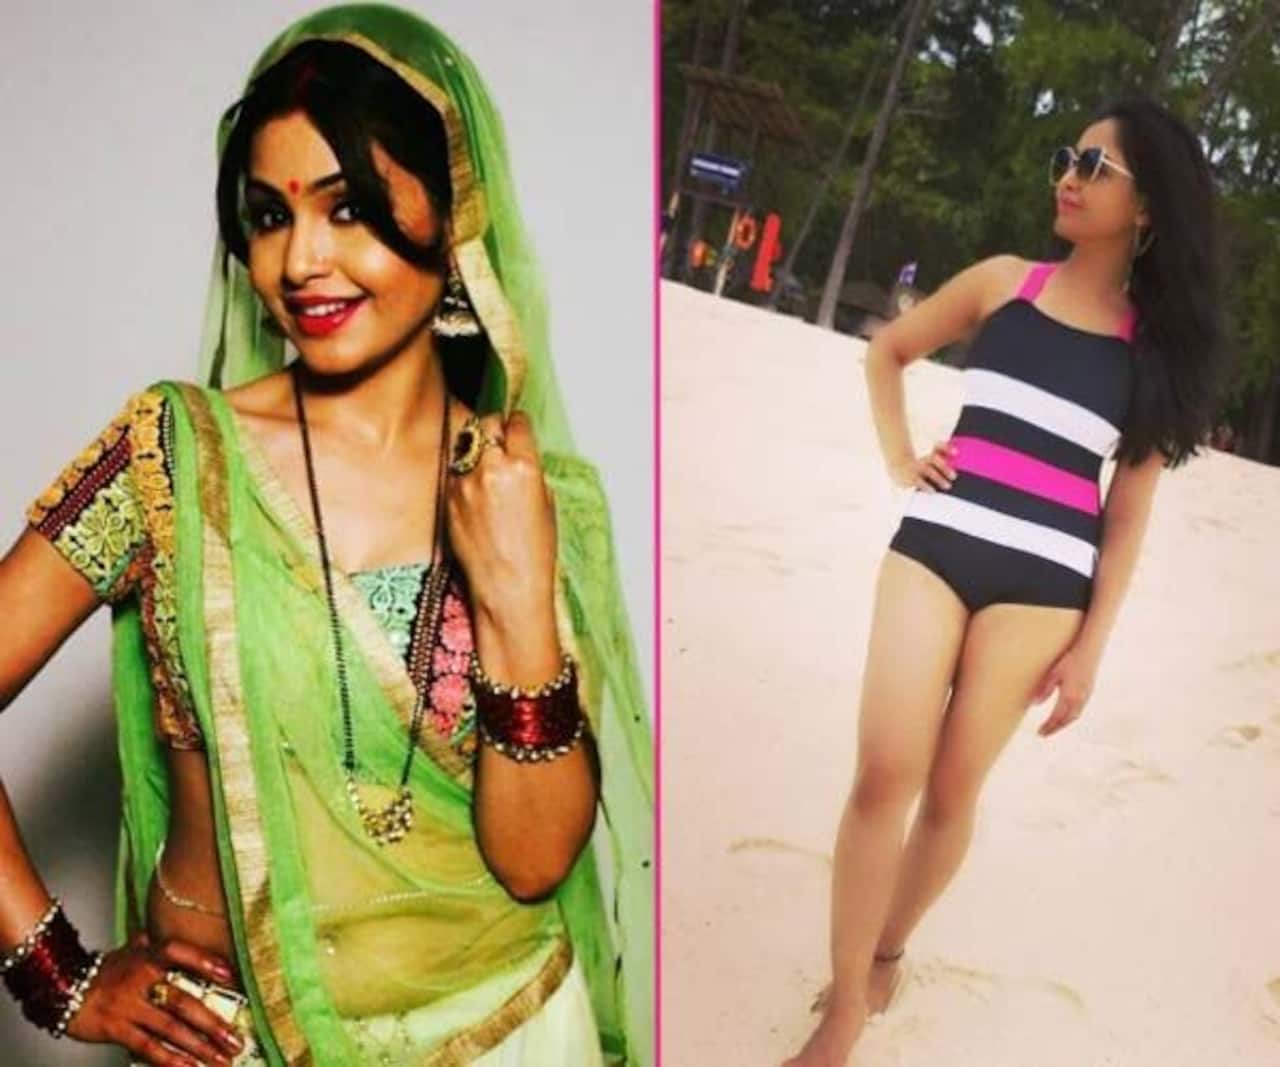 Shubhangi Atre on being trolled for her bikini pic: I don’t think women should be judged on the basis of their outfits